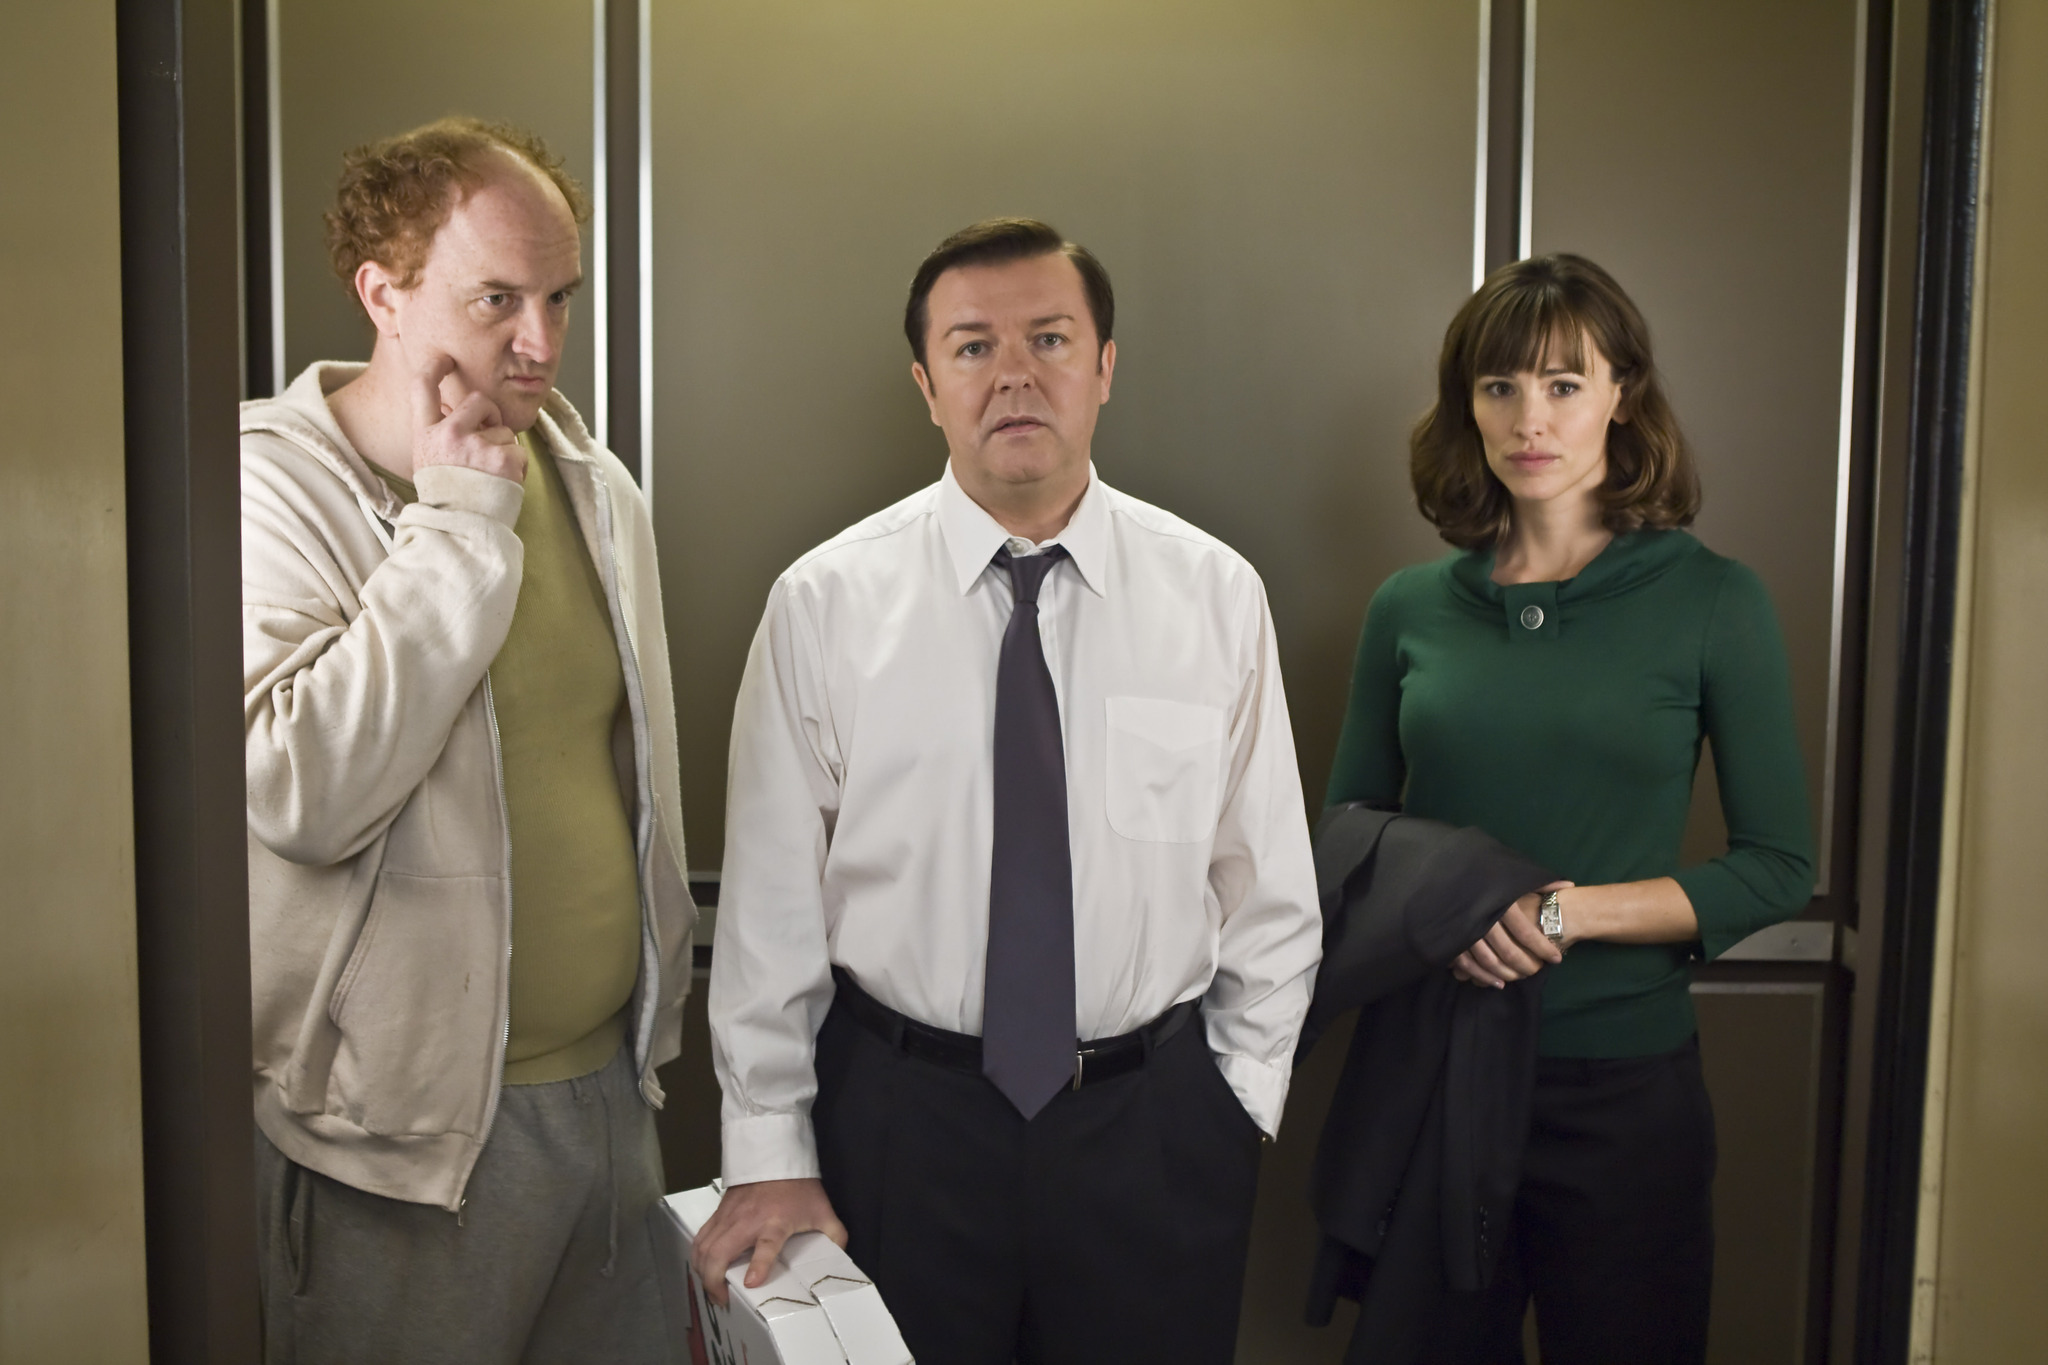 Still of Jennifer Garner, Louis C.K. and Ricky Gervais in The Invention of Lying (2009)